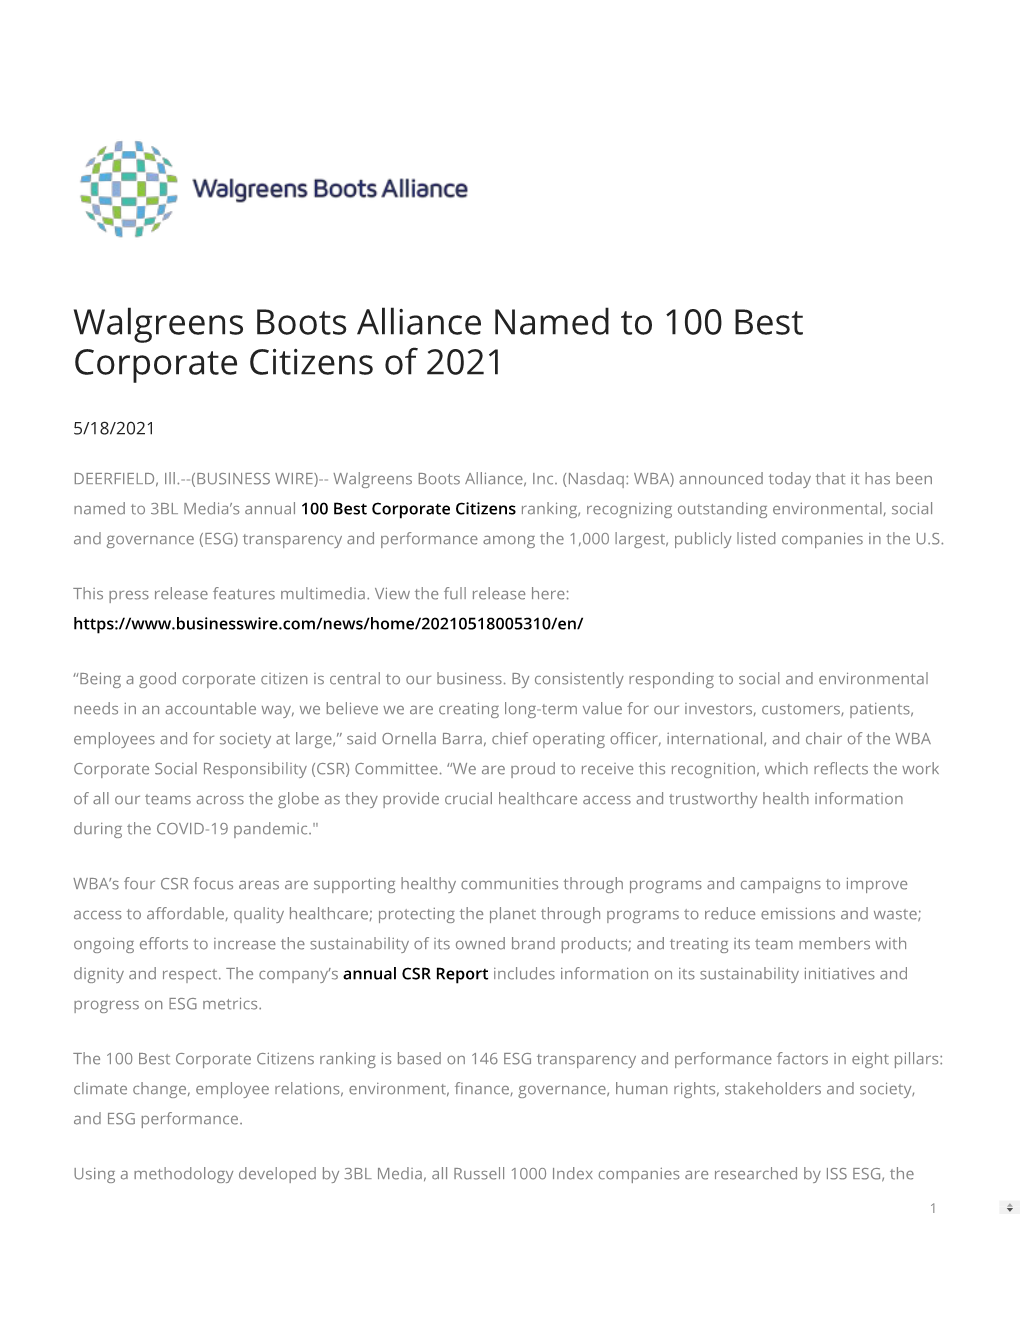 Walgreens Boots Alliance Named to 100 Best Corporate Citizens of 2021